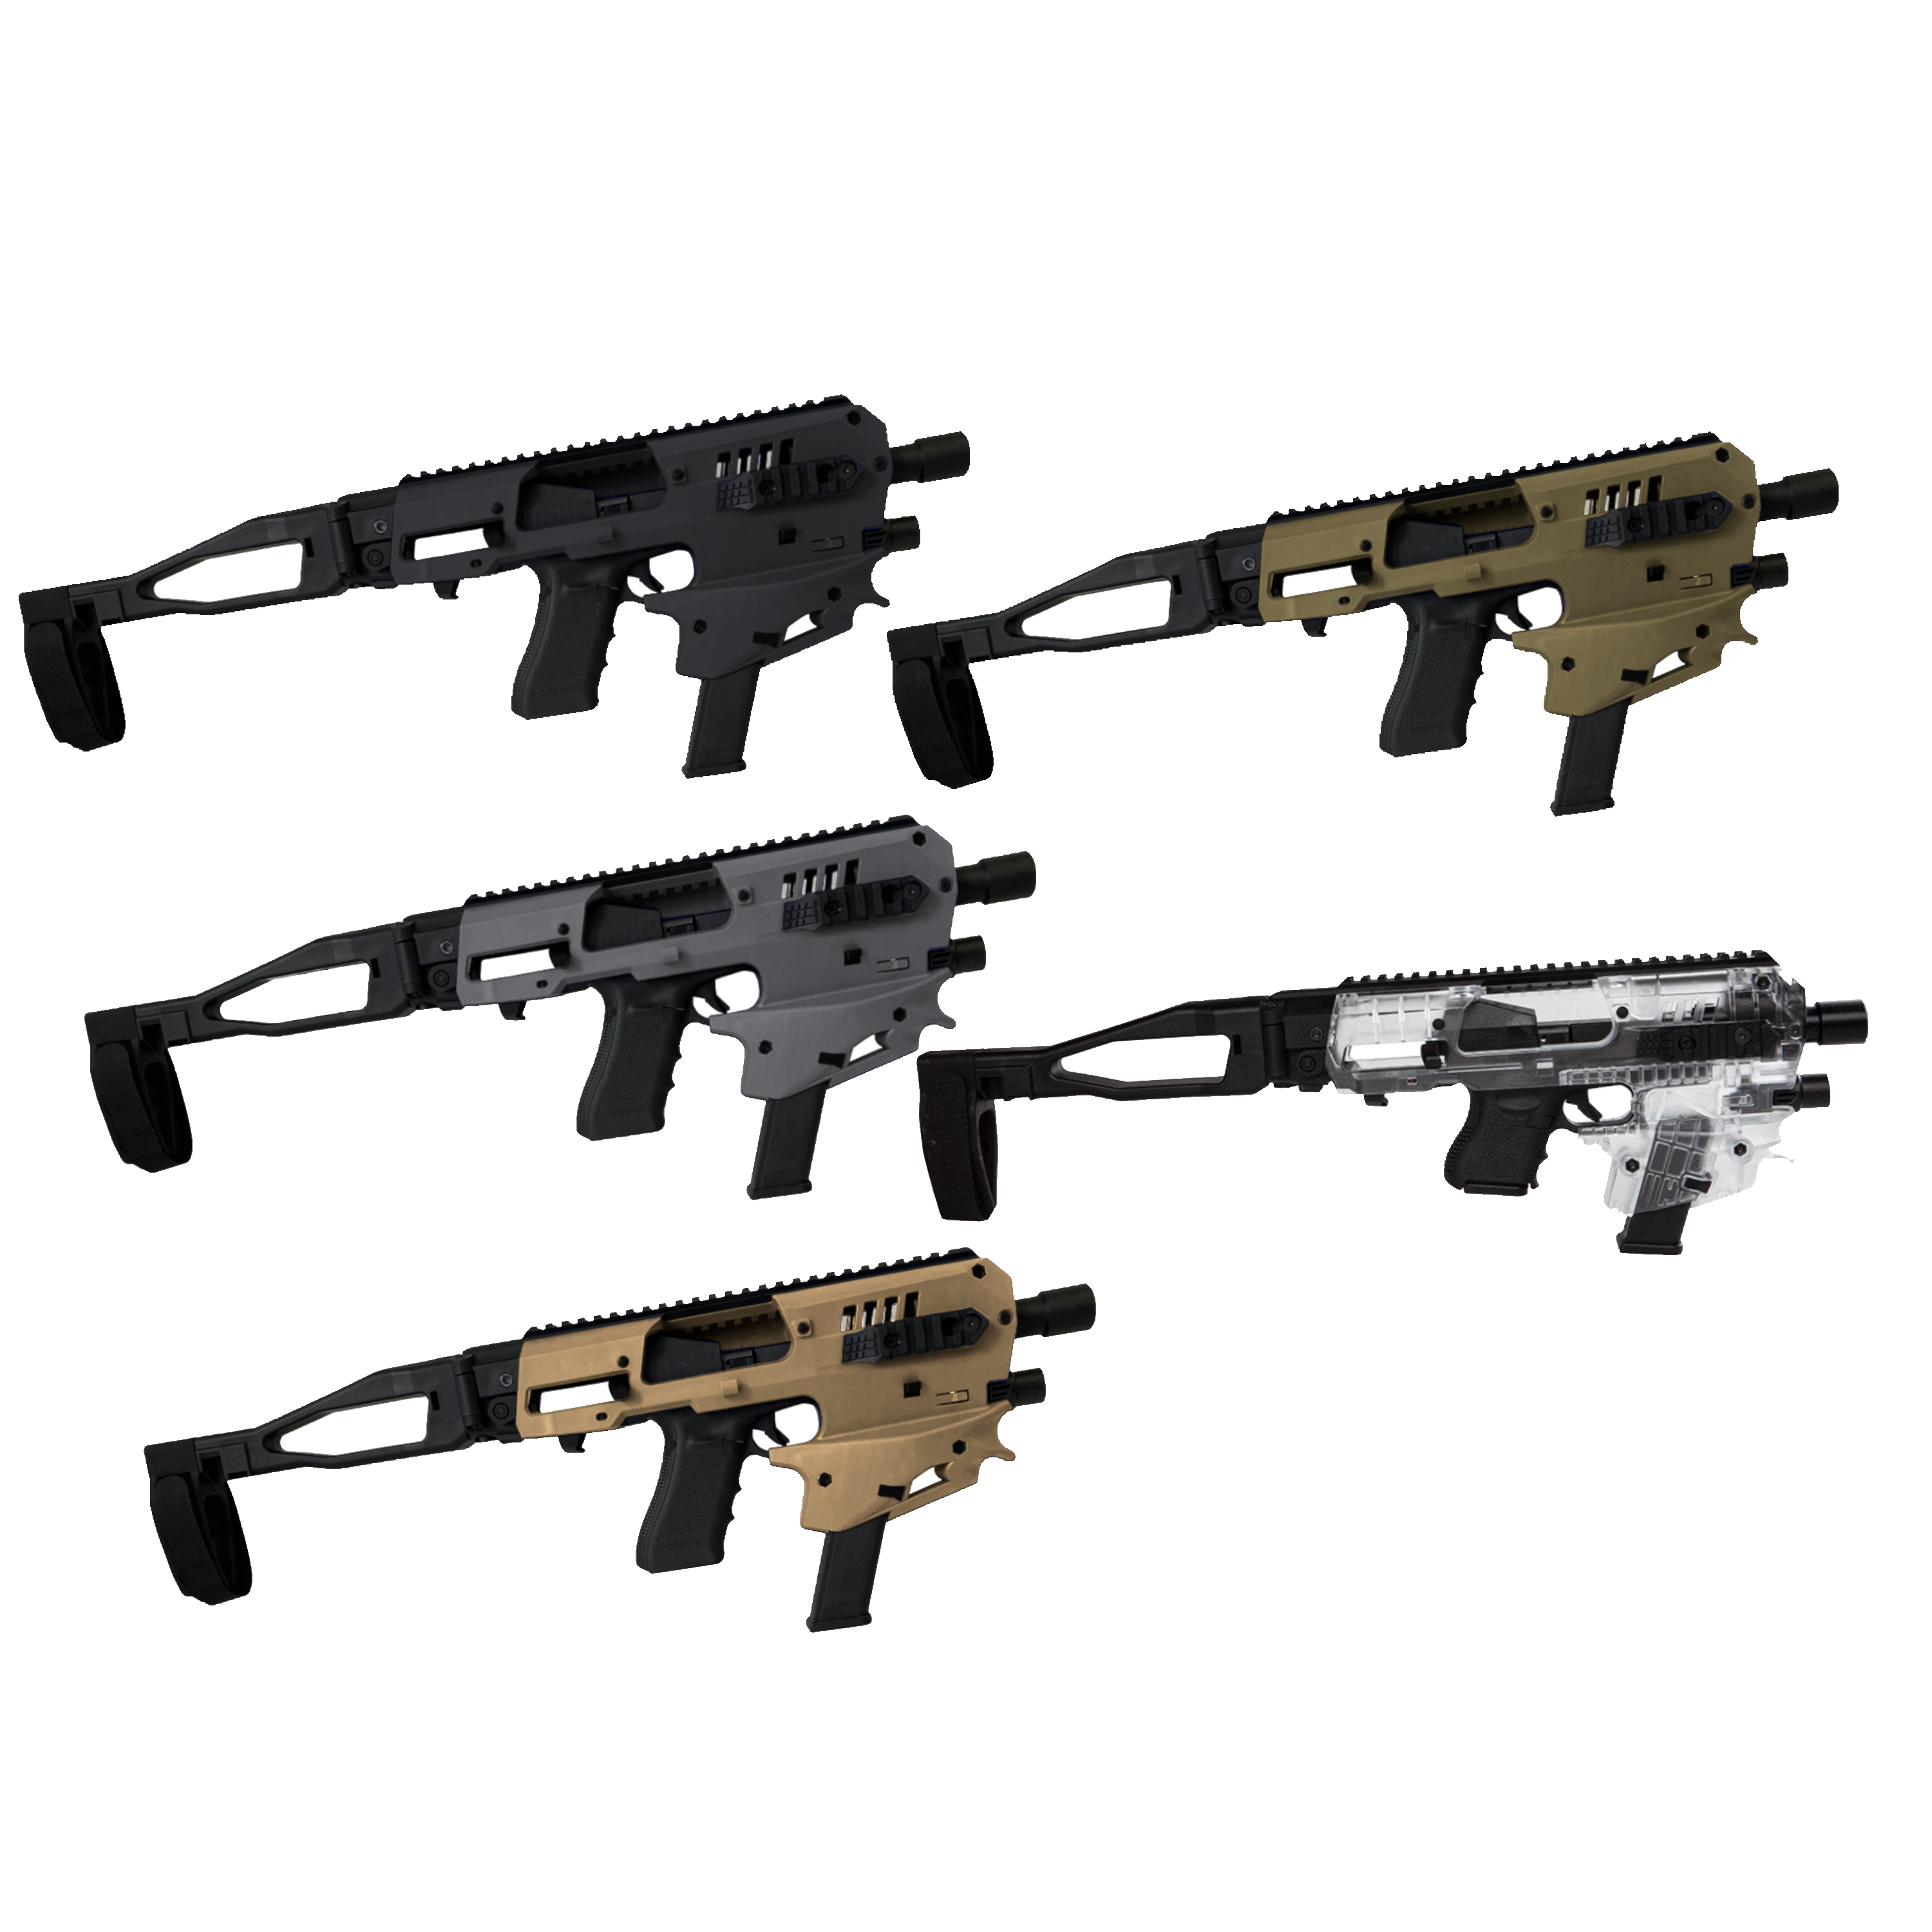 MCK Micro Conversion Kit  Glock Carbine for Glock 17, 19, 22 and